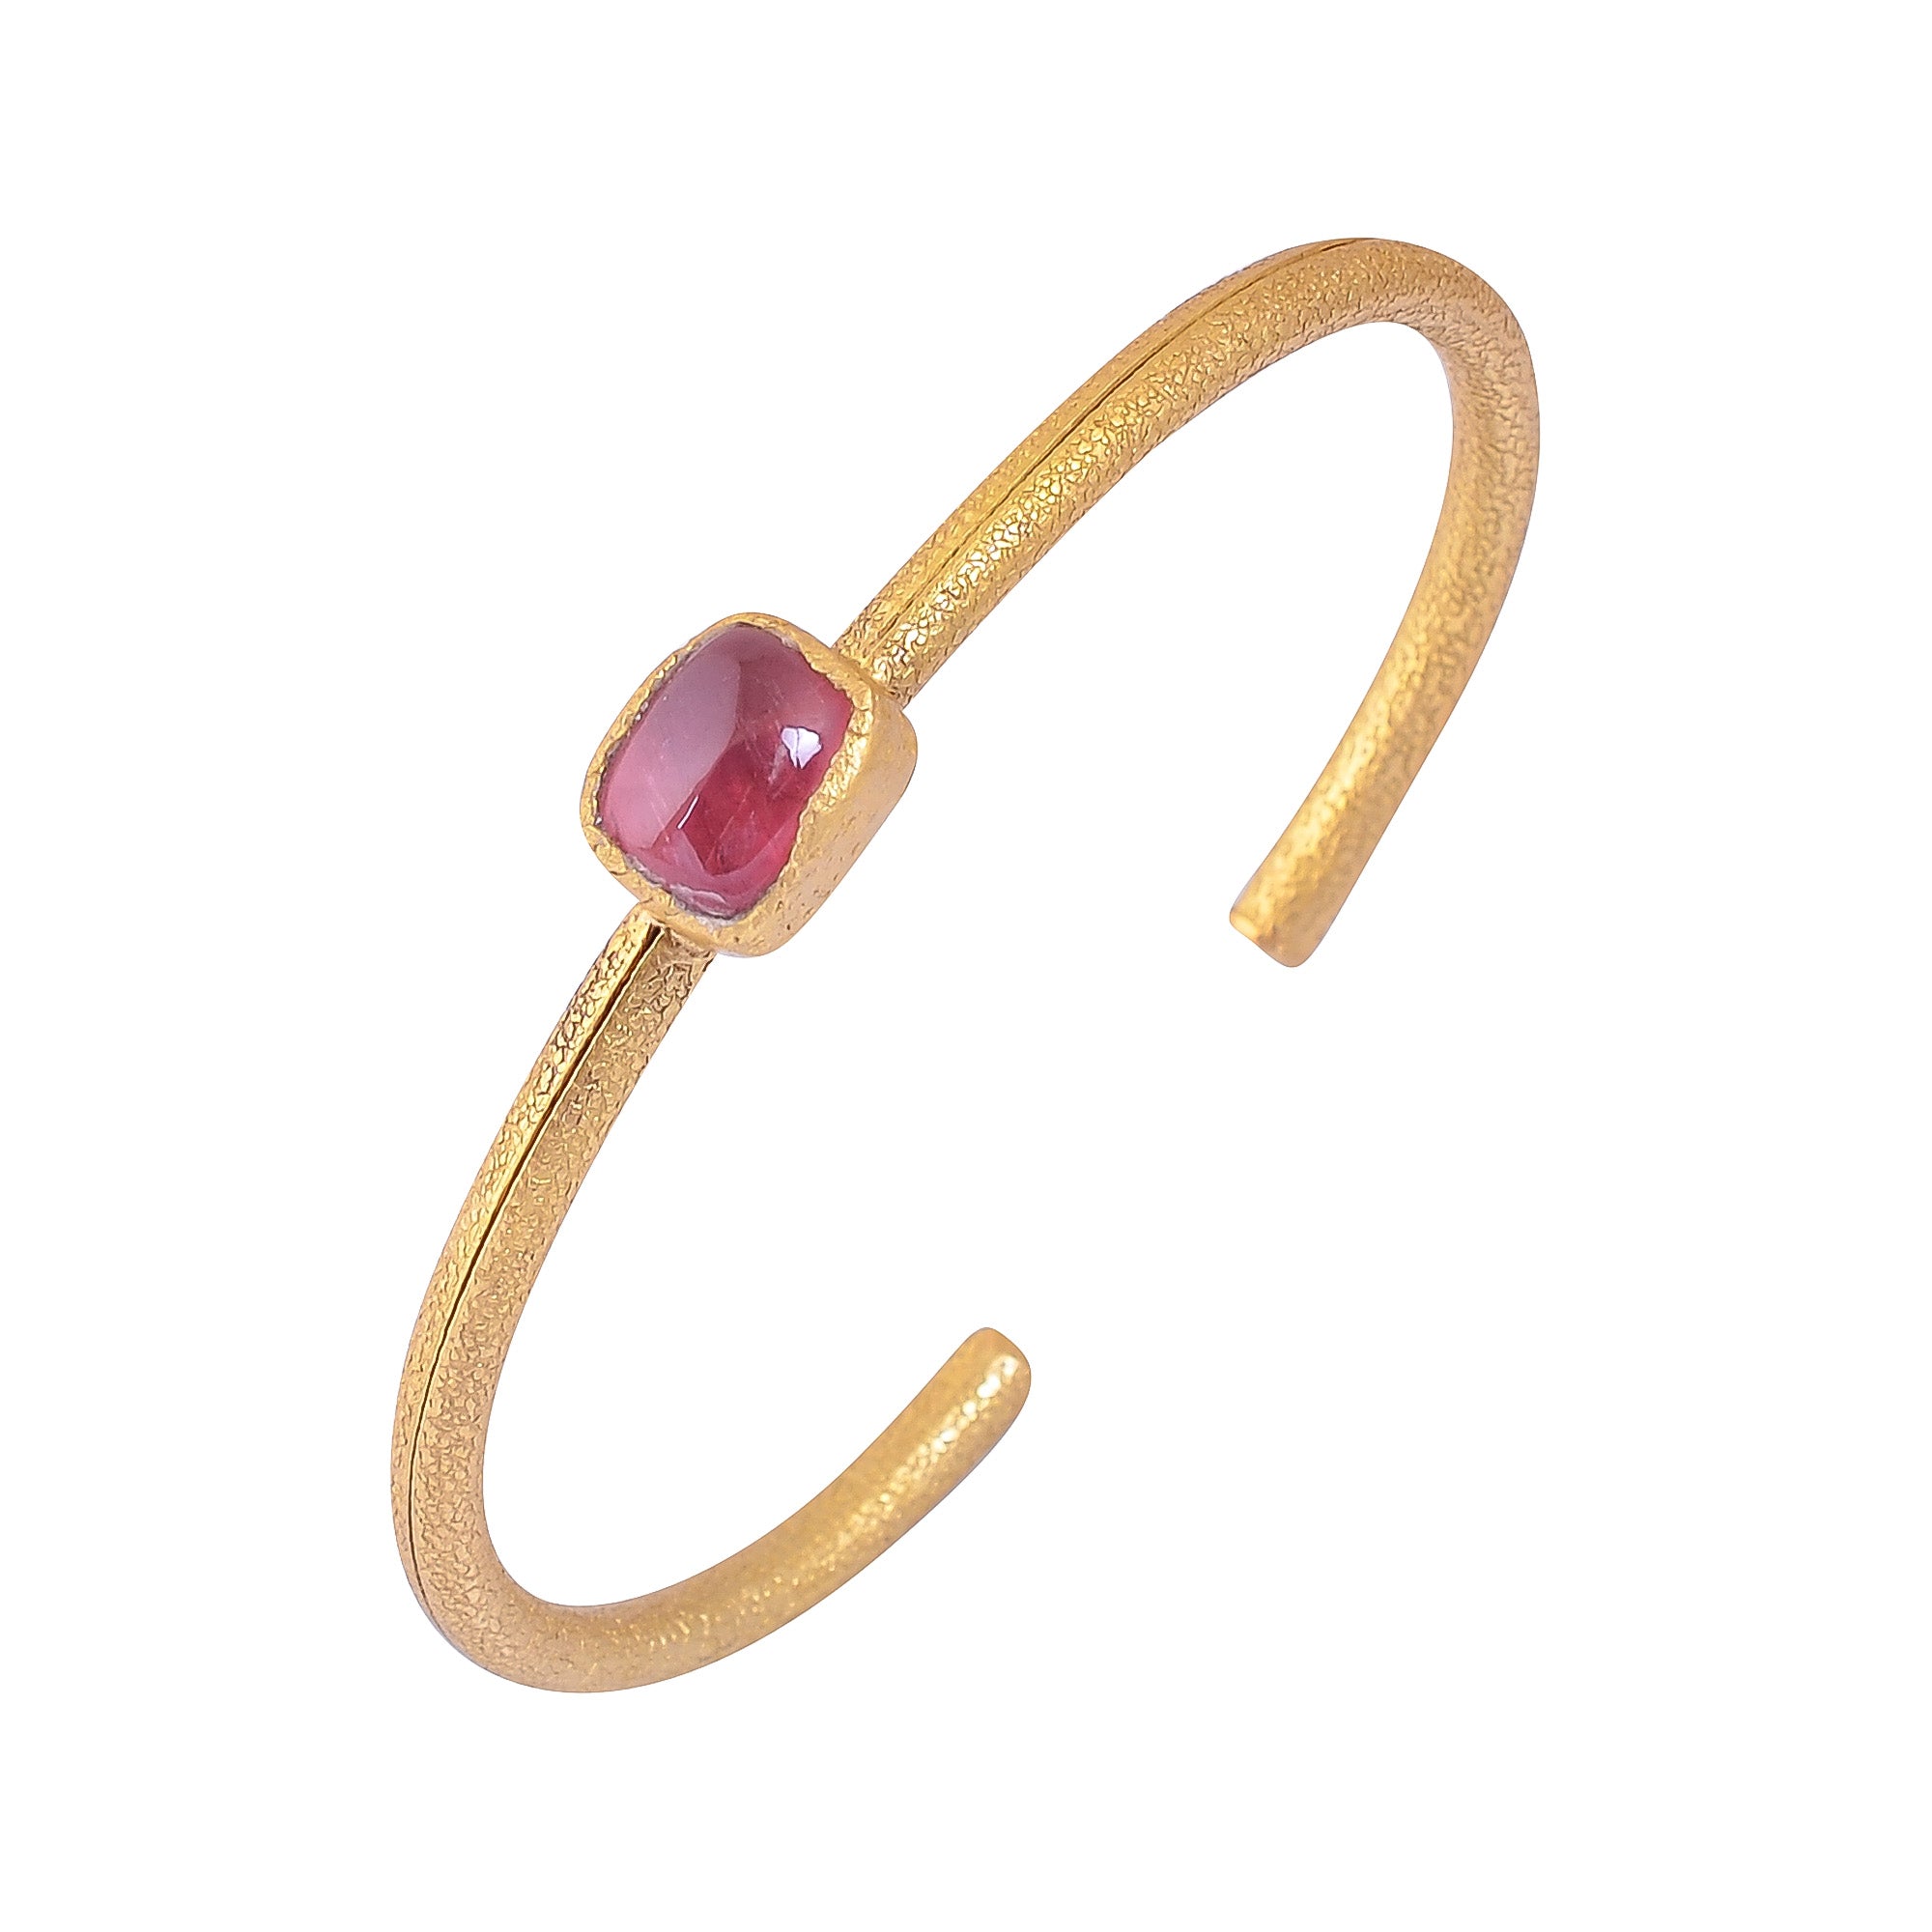 Buy Indian Handcrafted Silver Gold Plated Pink Tourmaline Cuff